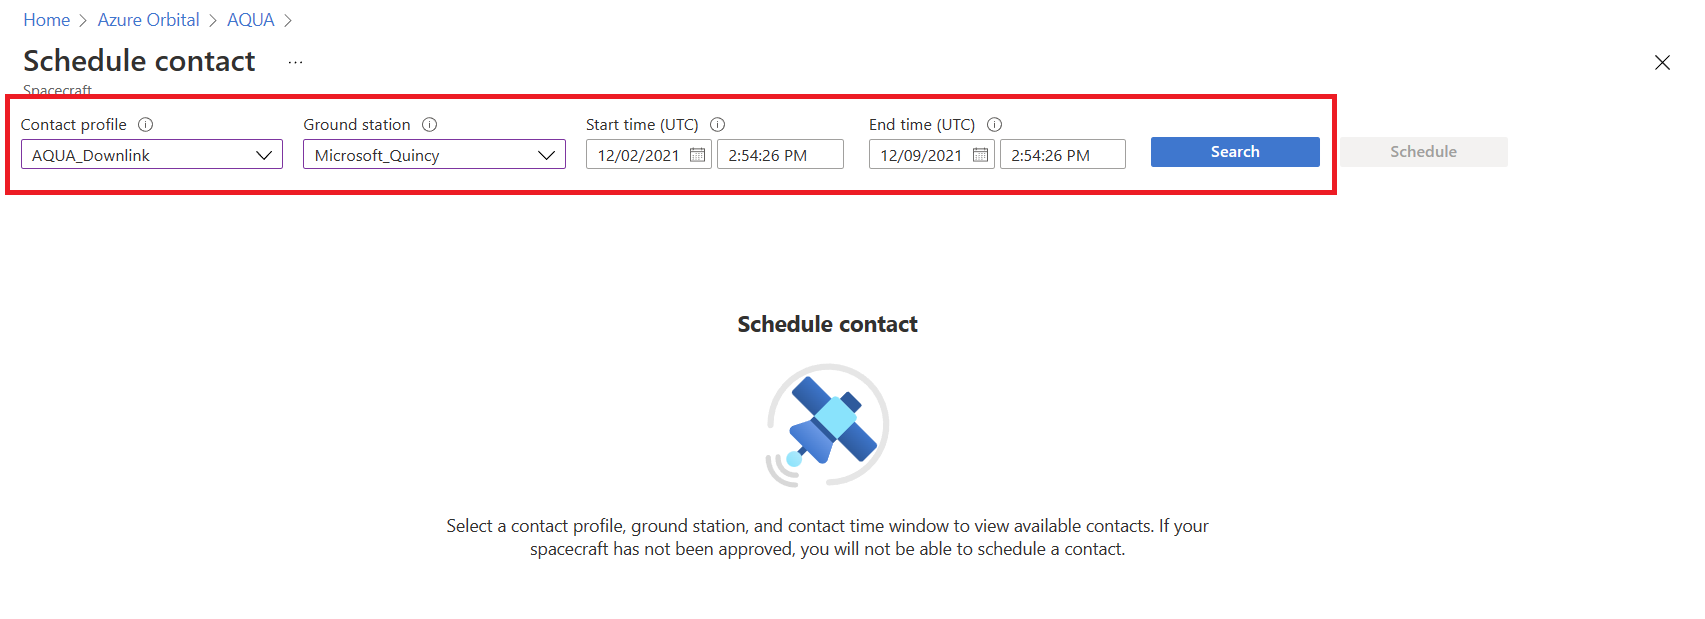 Screenshot of the Schedule contact page. There's a red box around the place where you can select the contact profile, ground station, start time, and end time.